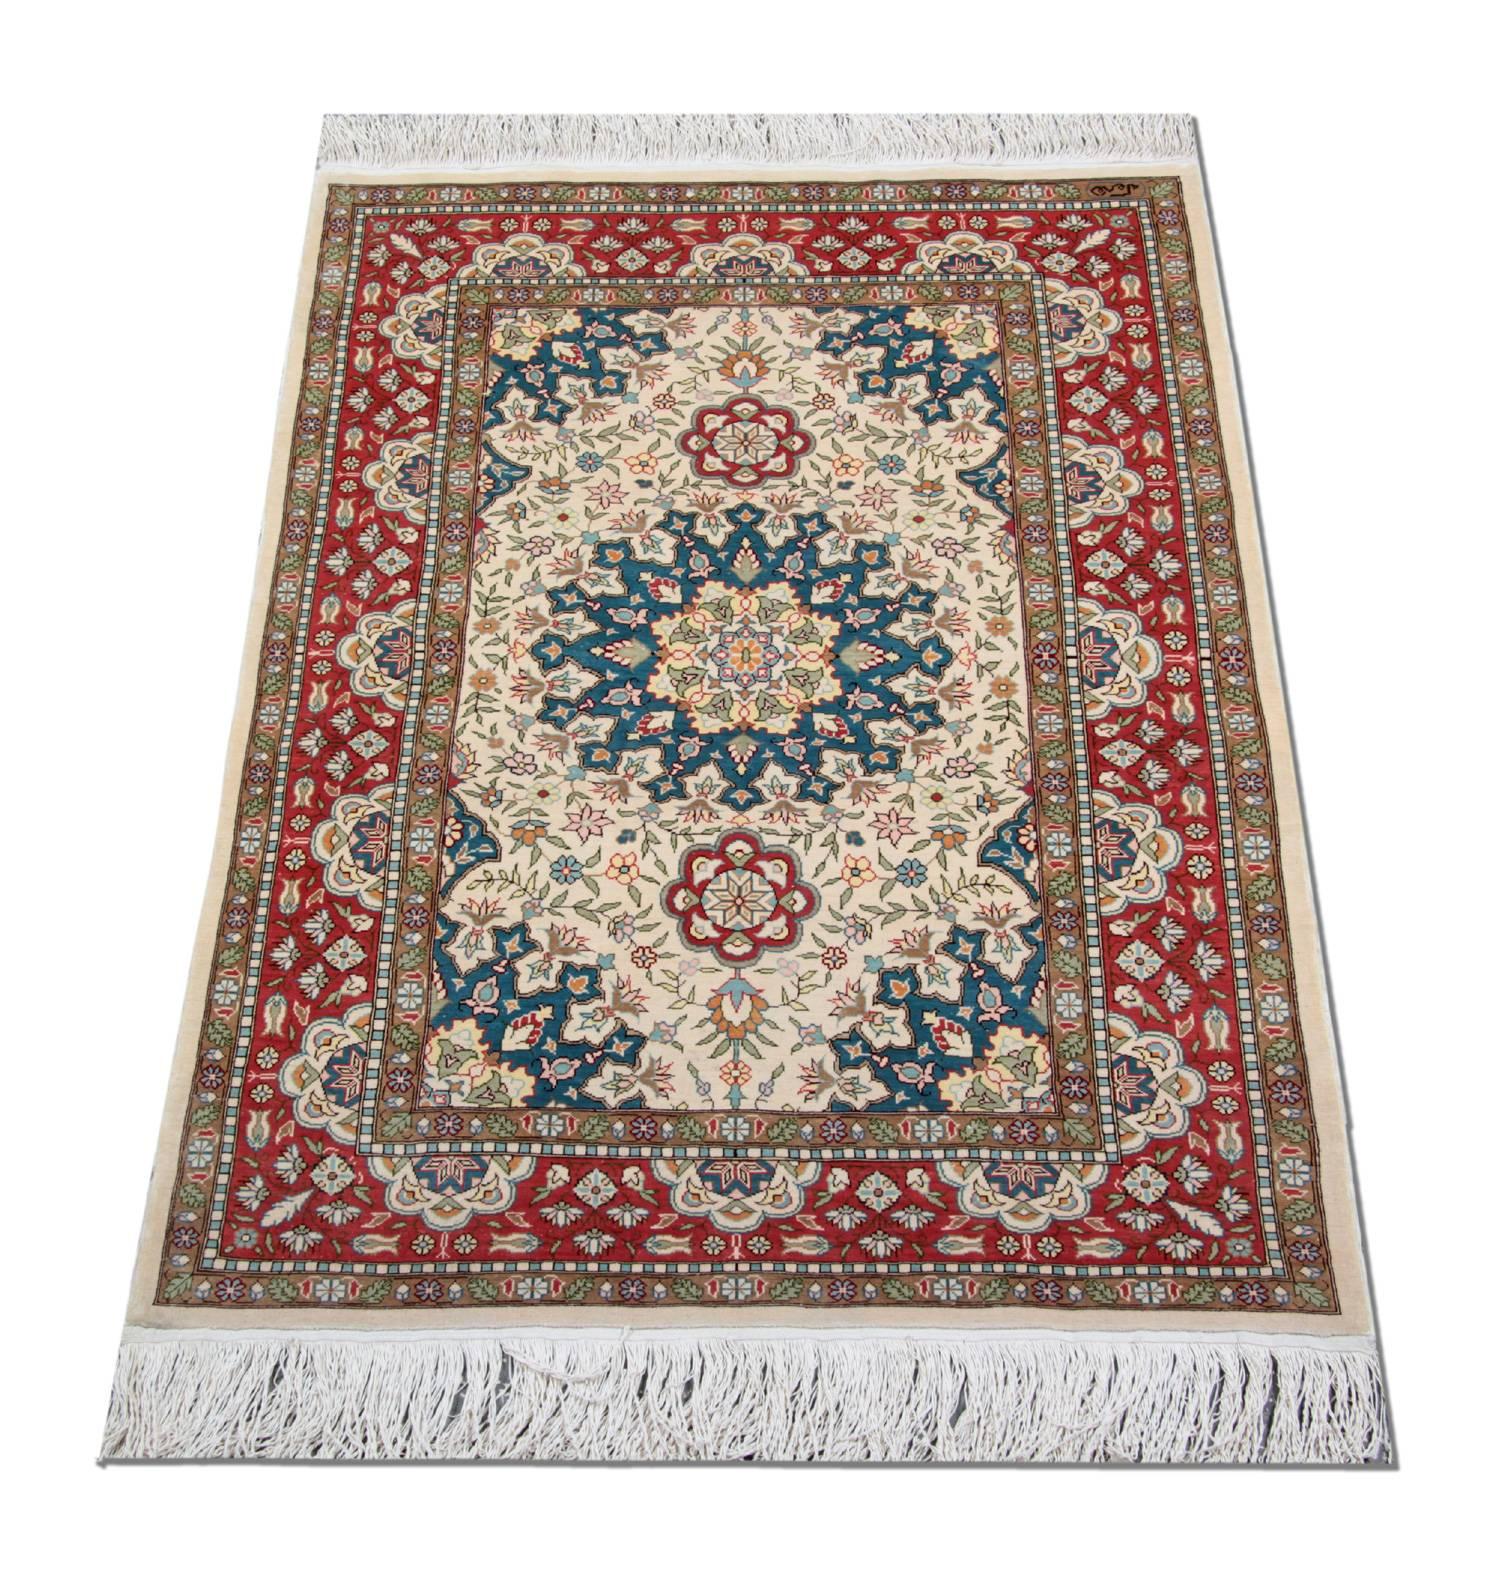 The manufacturing of these masterpieces luxury oriental rugs began late the 19th century. This handmade carpet was woven in Asian Anatolia, Turkey in the historic city of Hereke. In the mid-19th century, Sultan Abdul Majid proclaimed Hereke to be